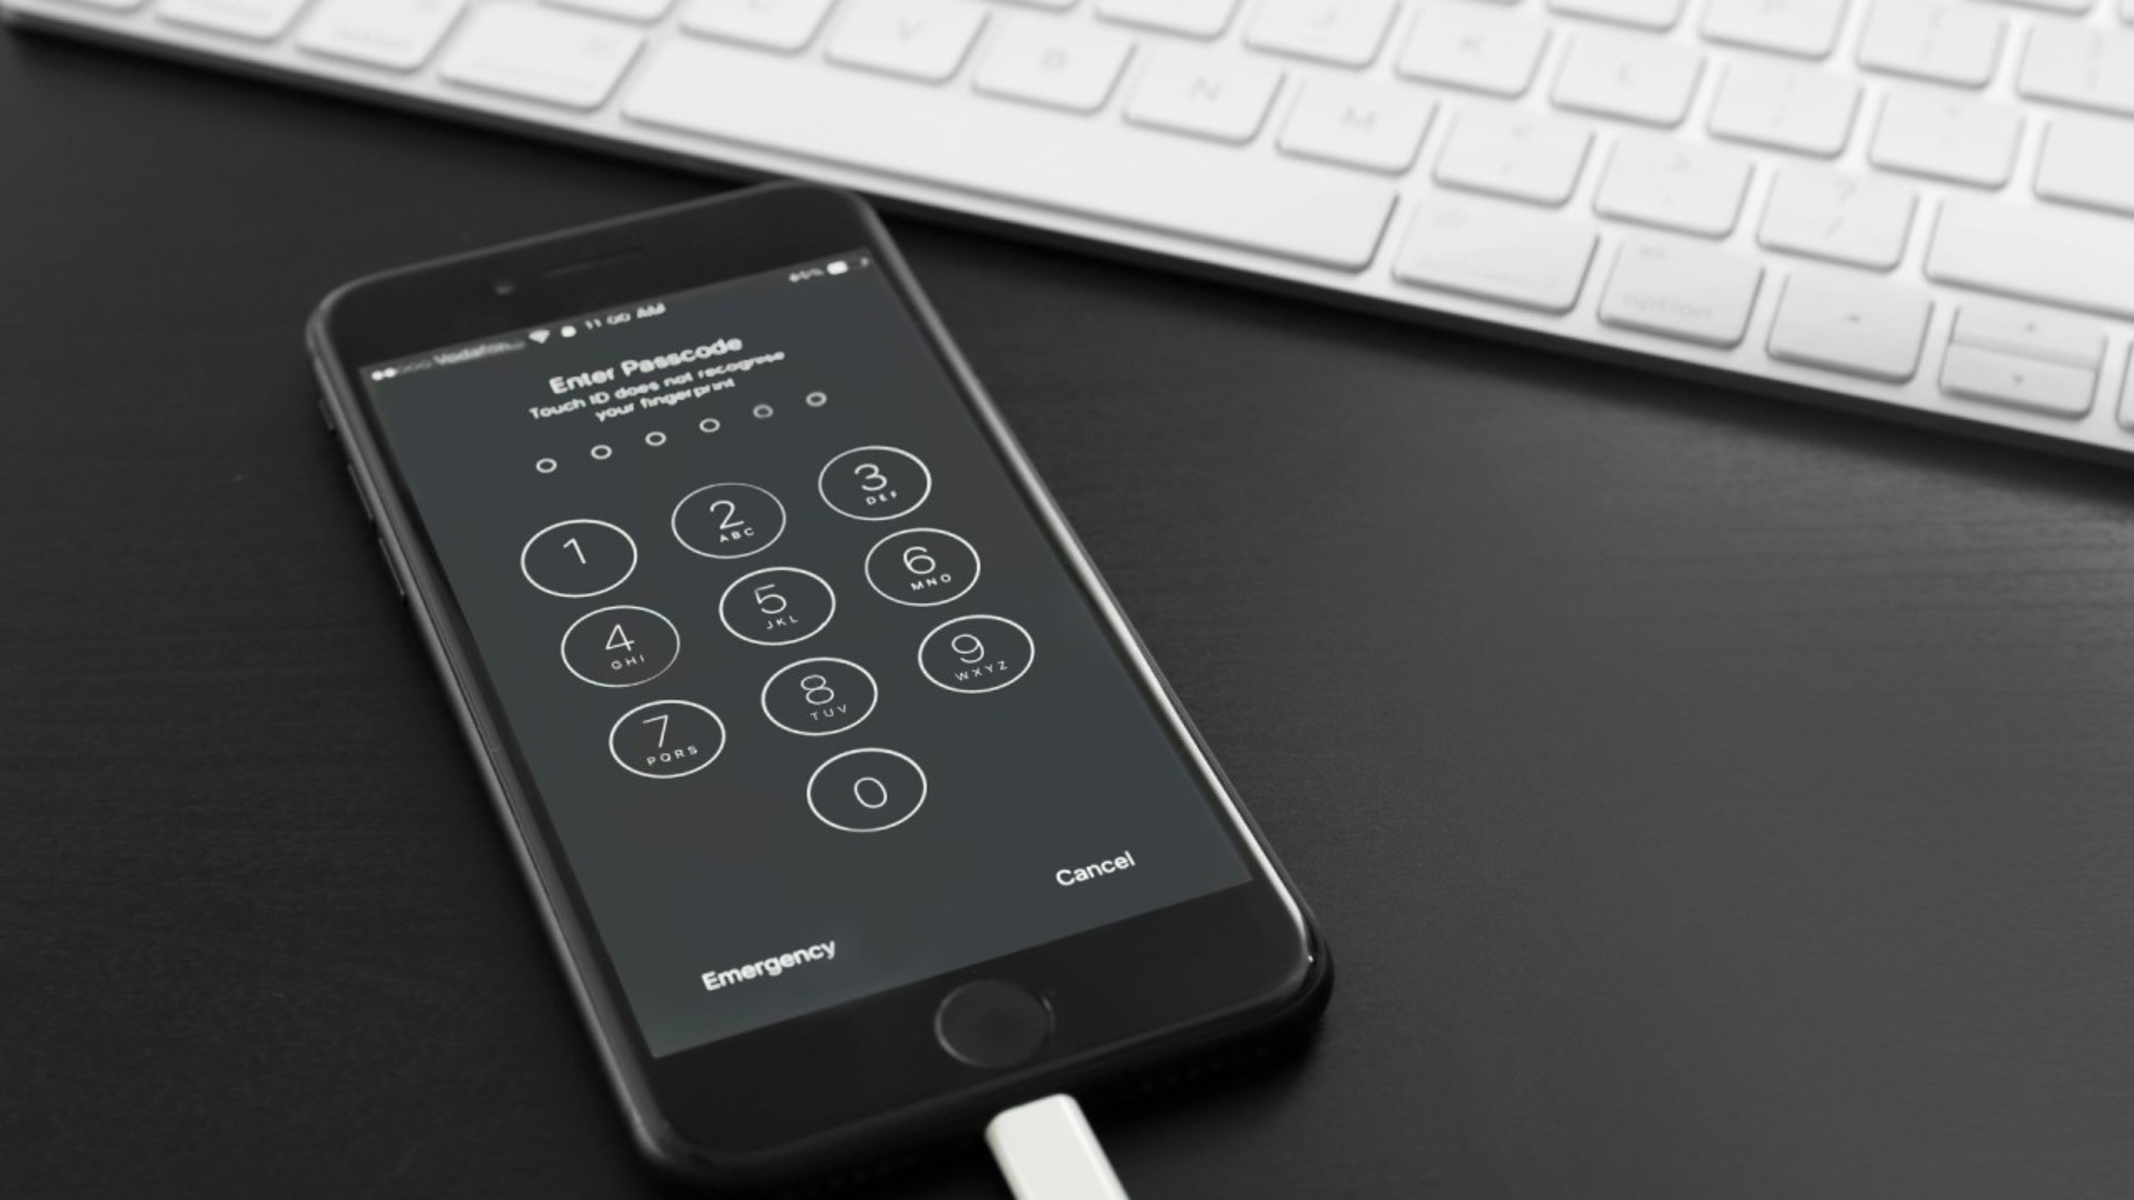 How To Unlock Smartphone Without Password